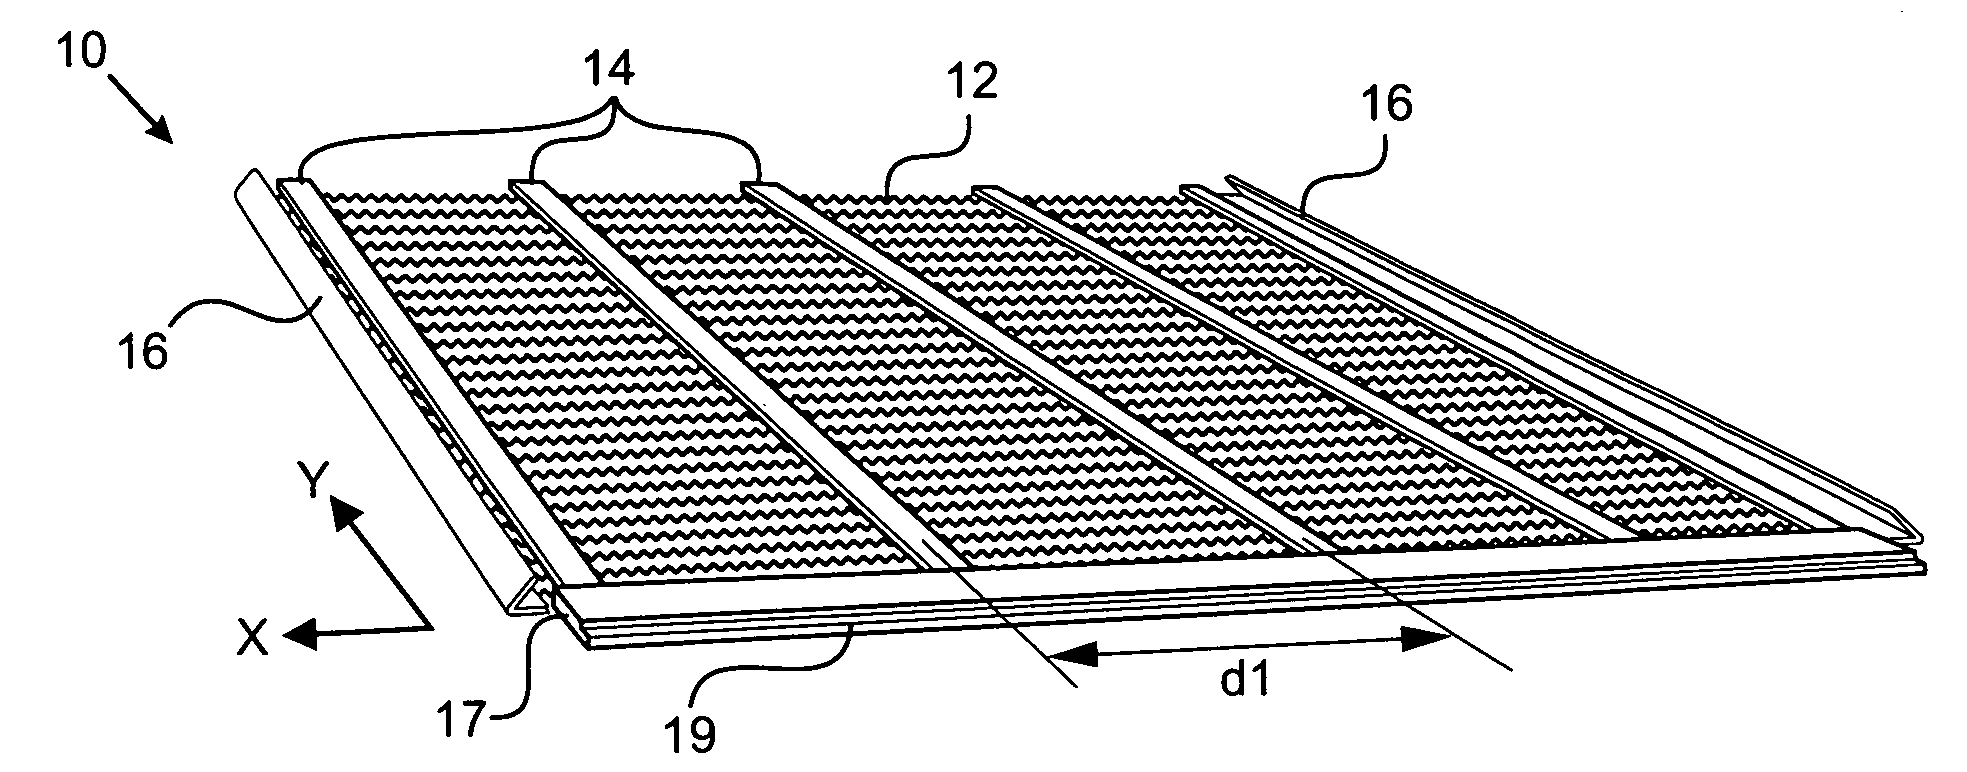 Apparatus and method for making wire screen